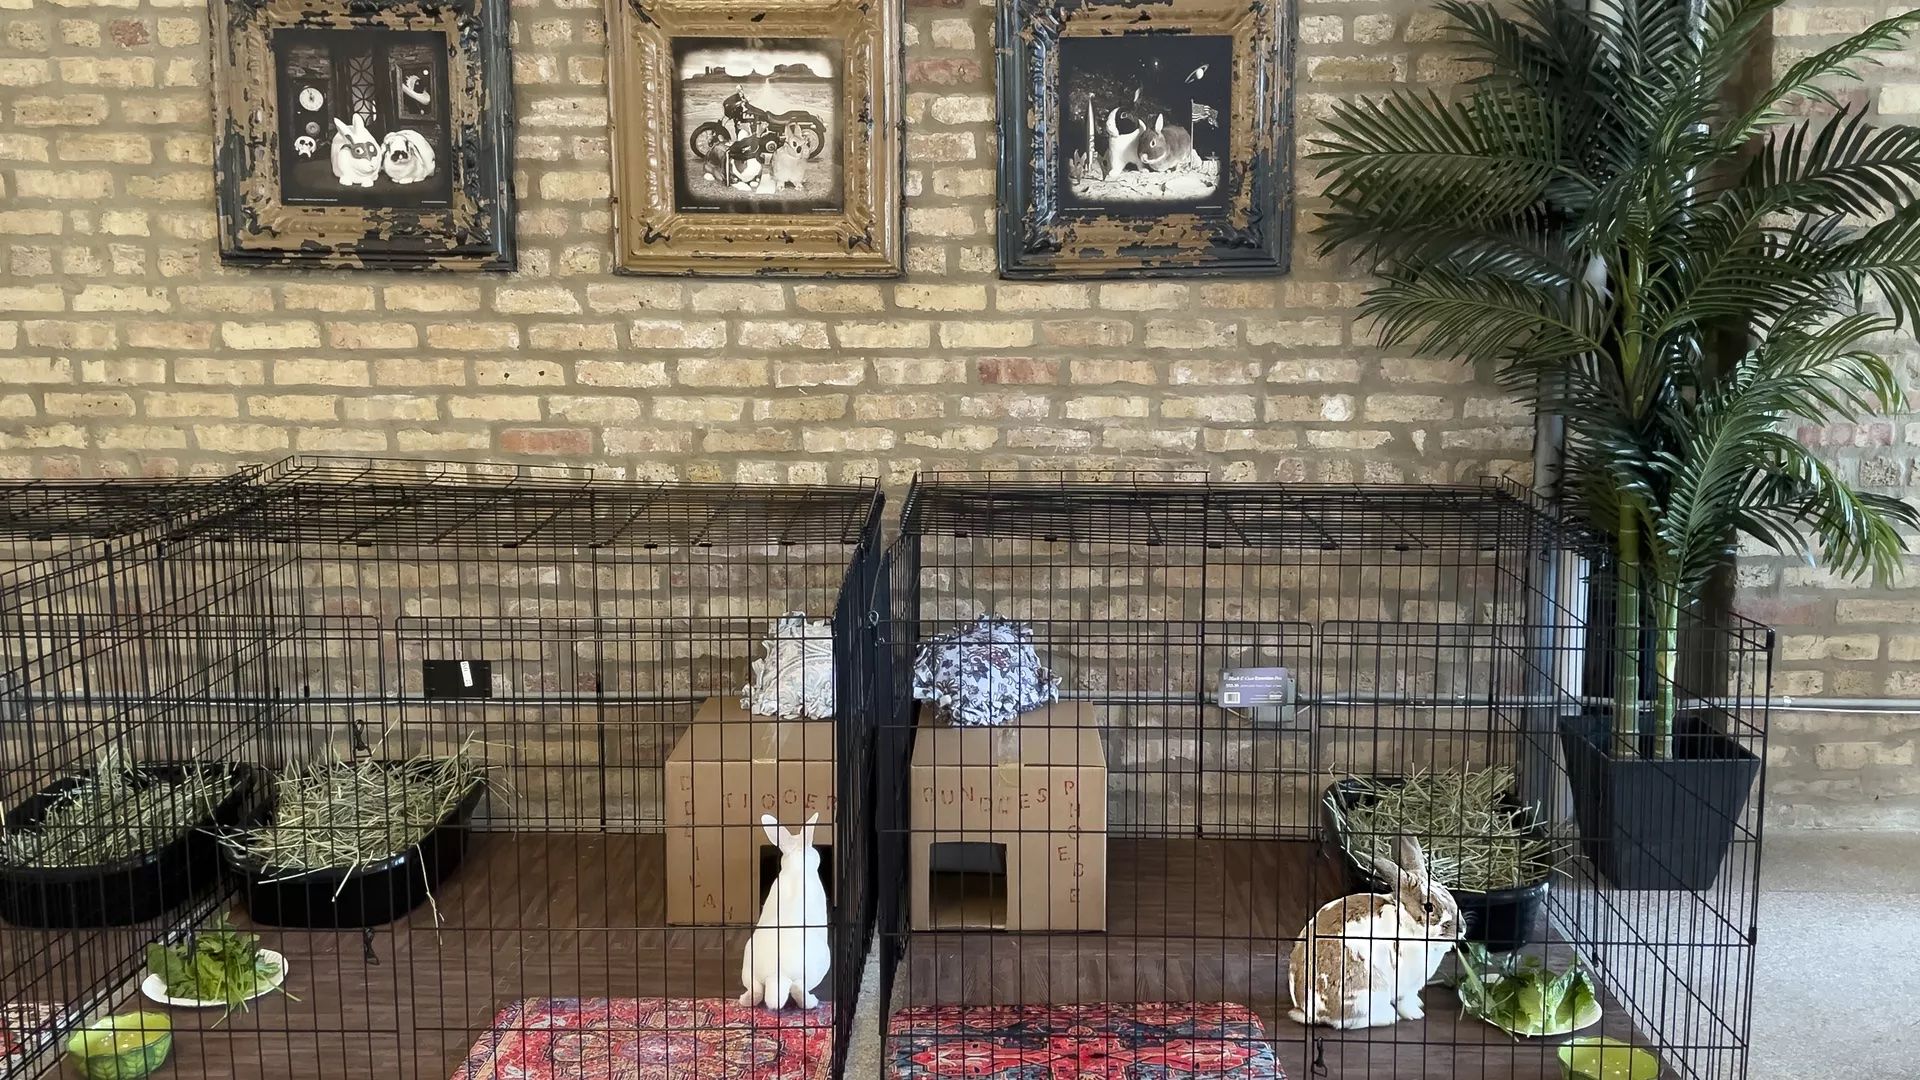 Cages with rabbits in them that are meant as "hotel rooms" for bunnies.